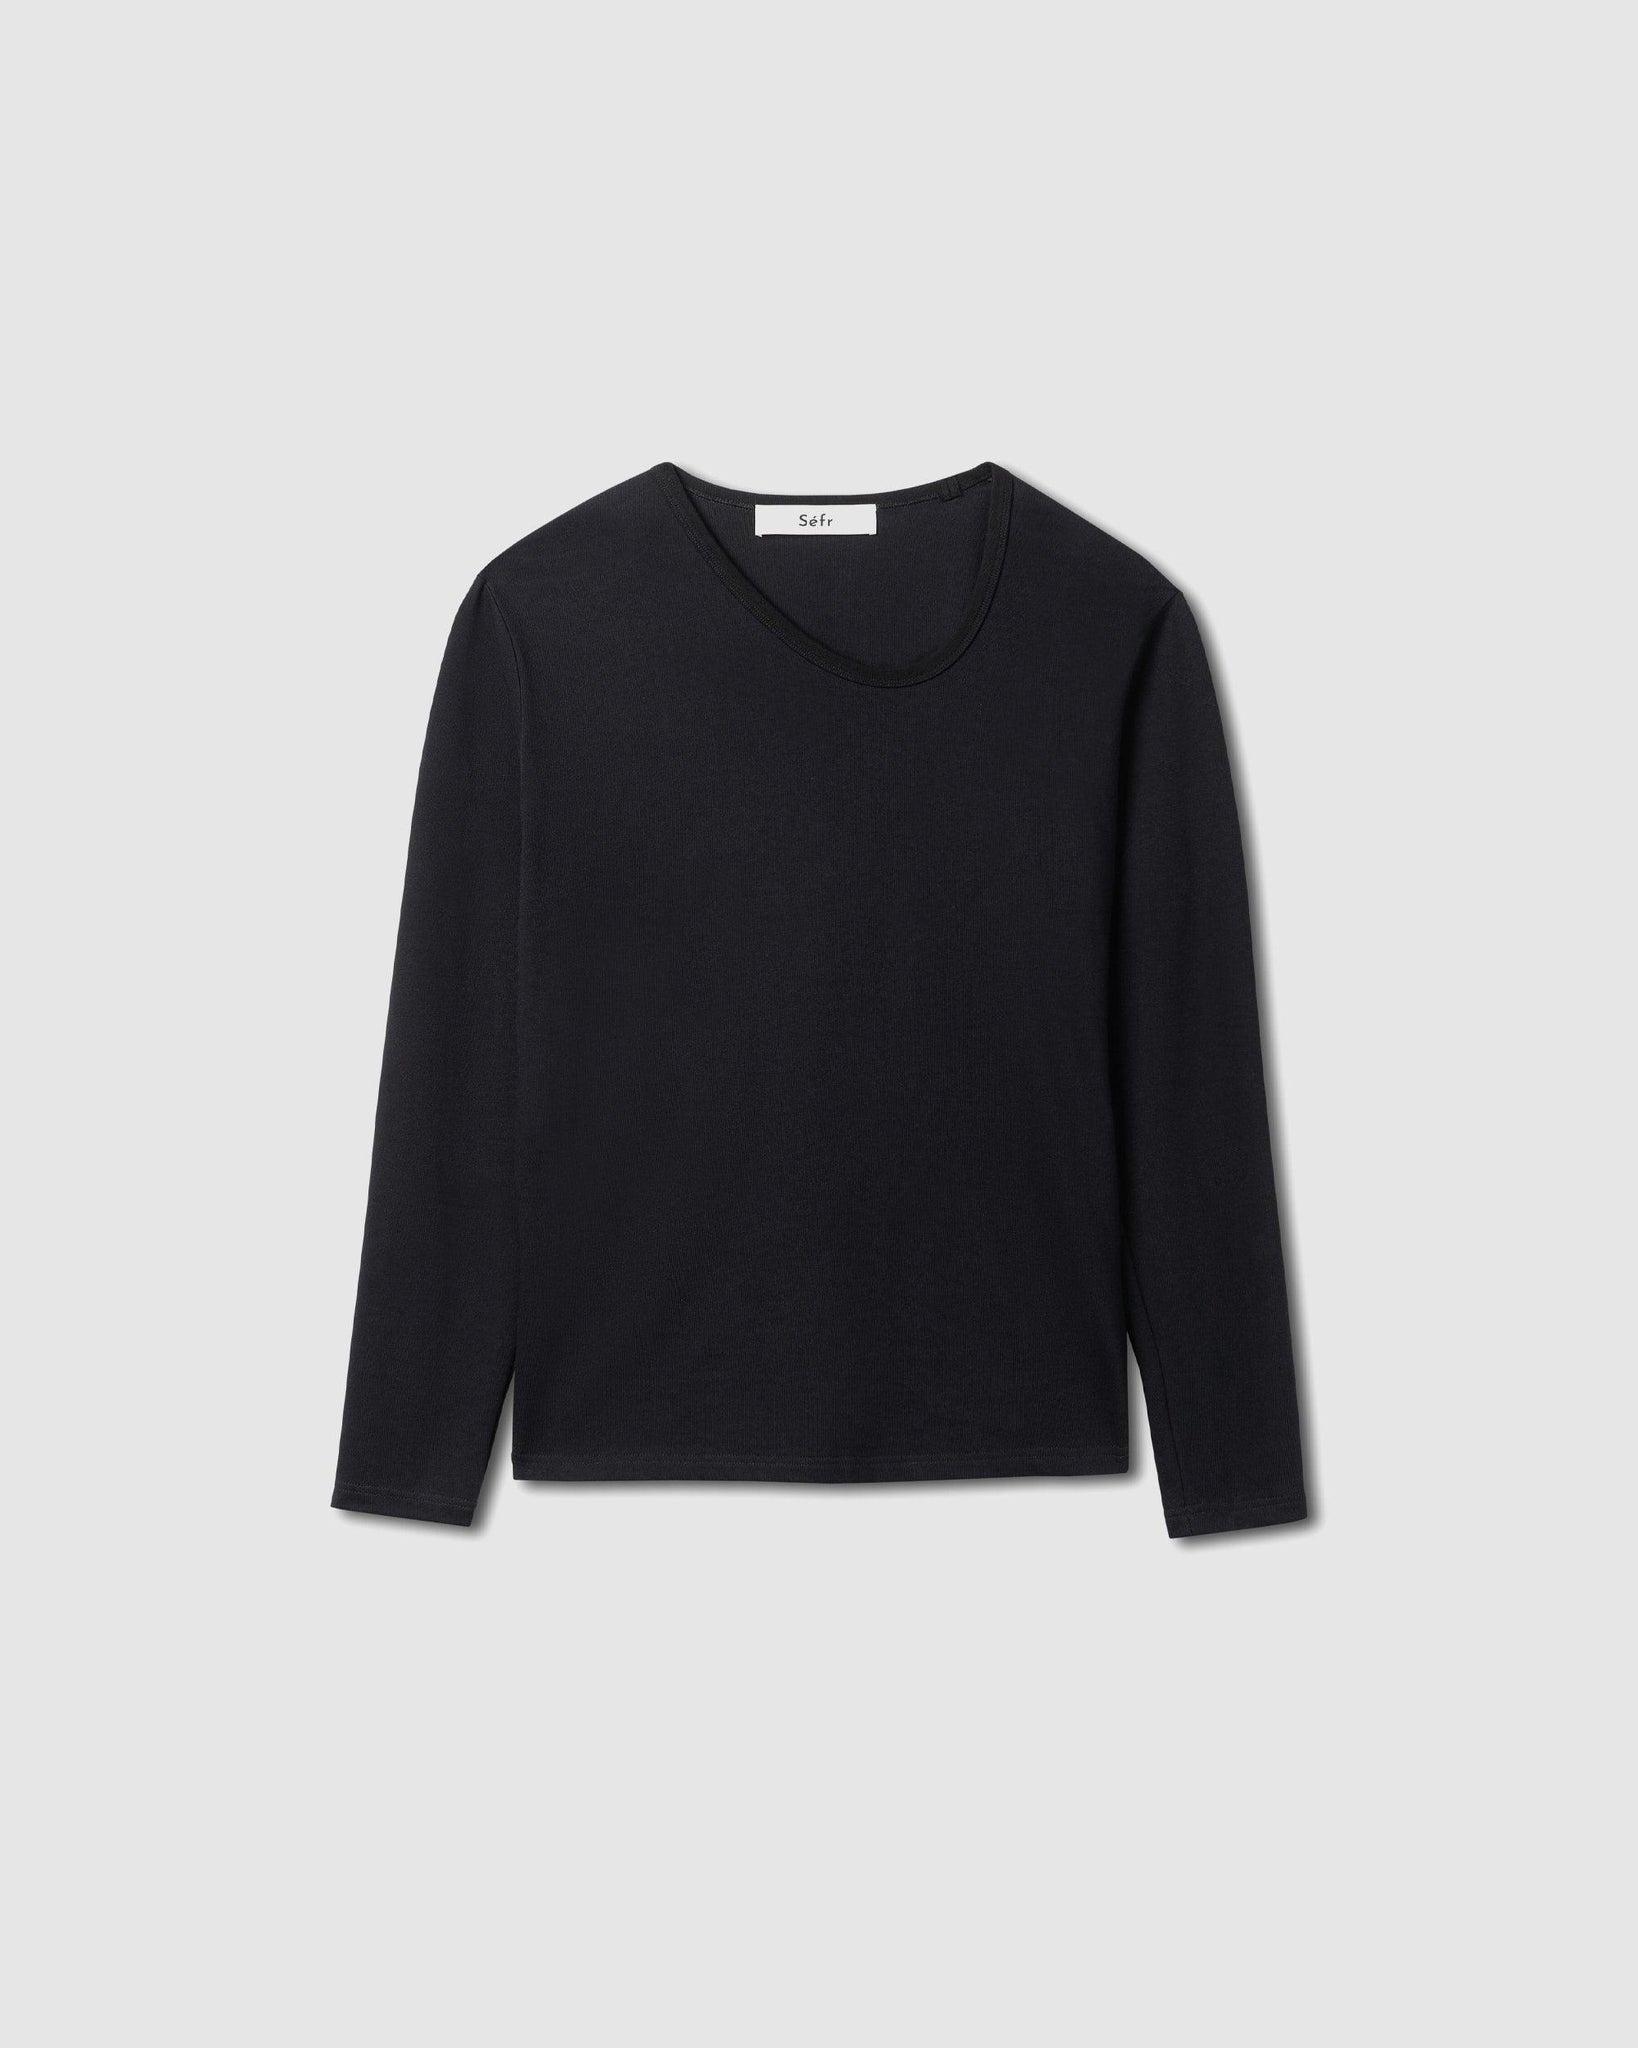 Uneven Longsleeve Top Black - {{ collection.title }} - Chinatown Country Club 